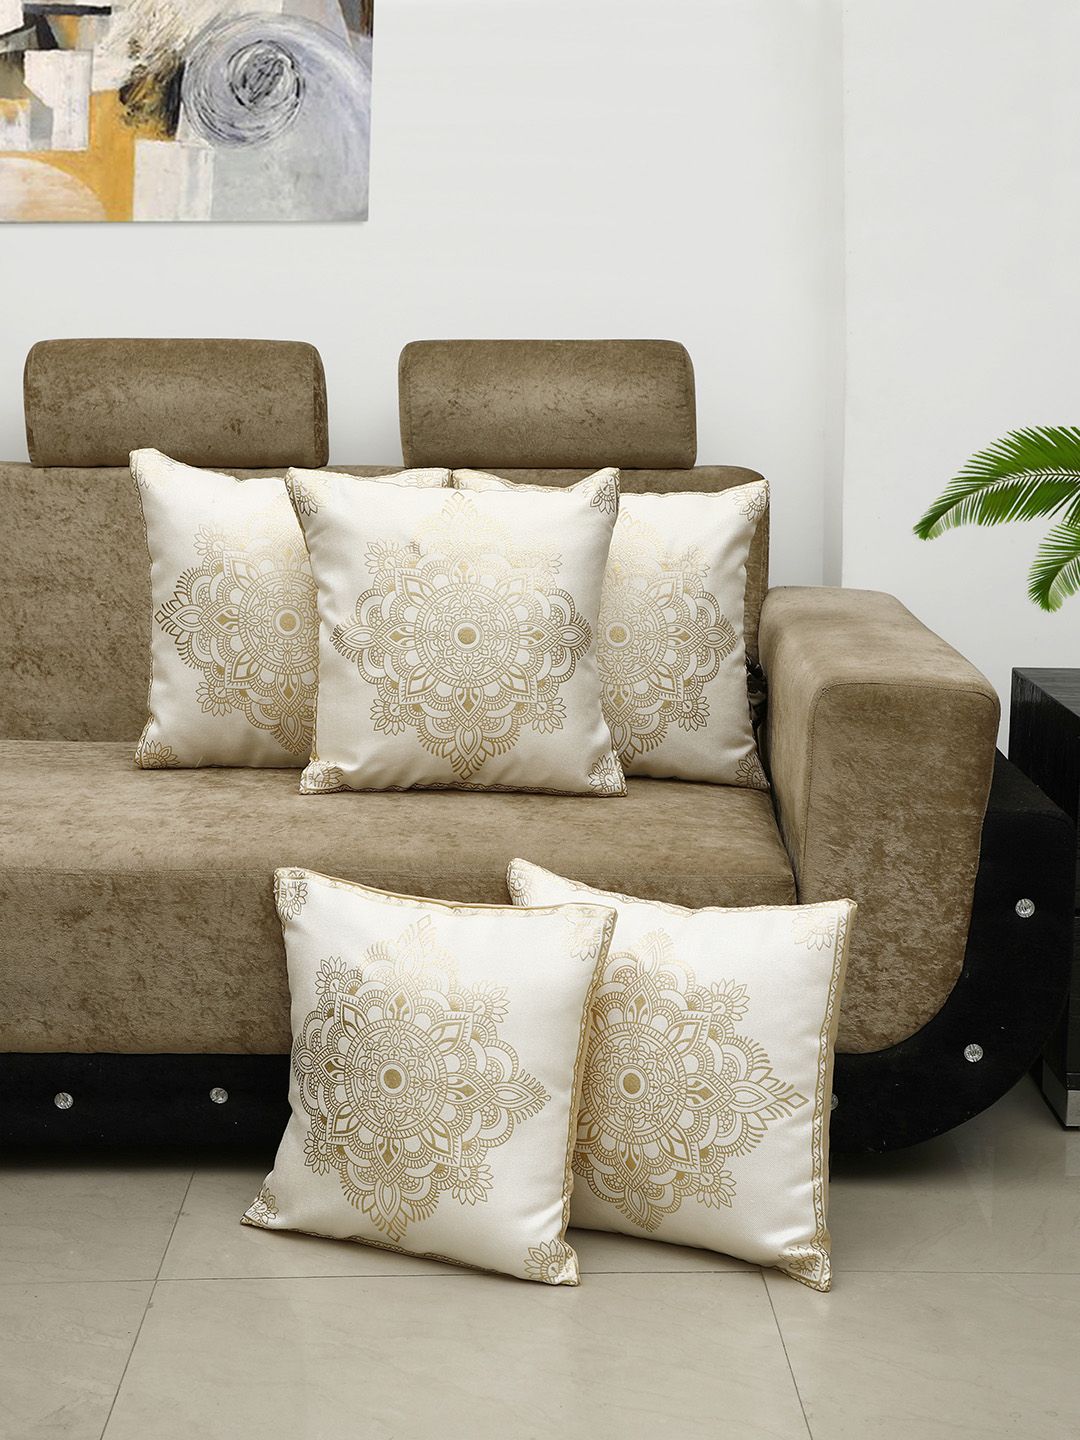 HOSTA HOMES Cream-Coloured & Gold-Toned Set of 5 Foil Printed Square Cushion Covers Price in India